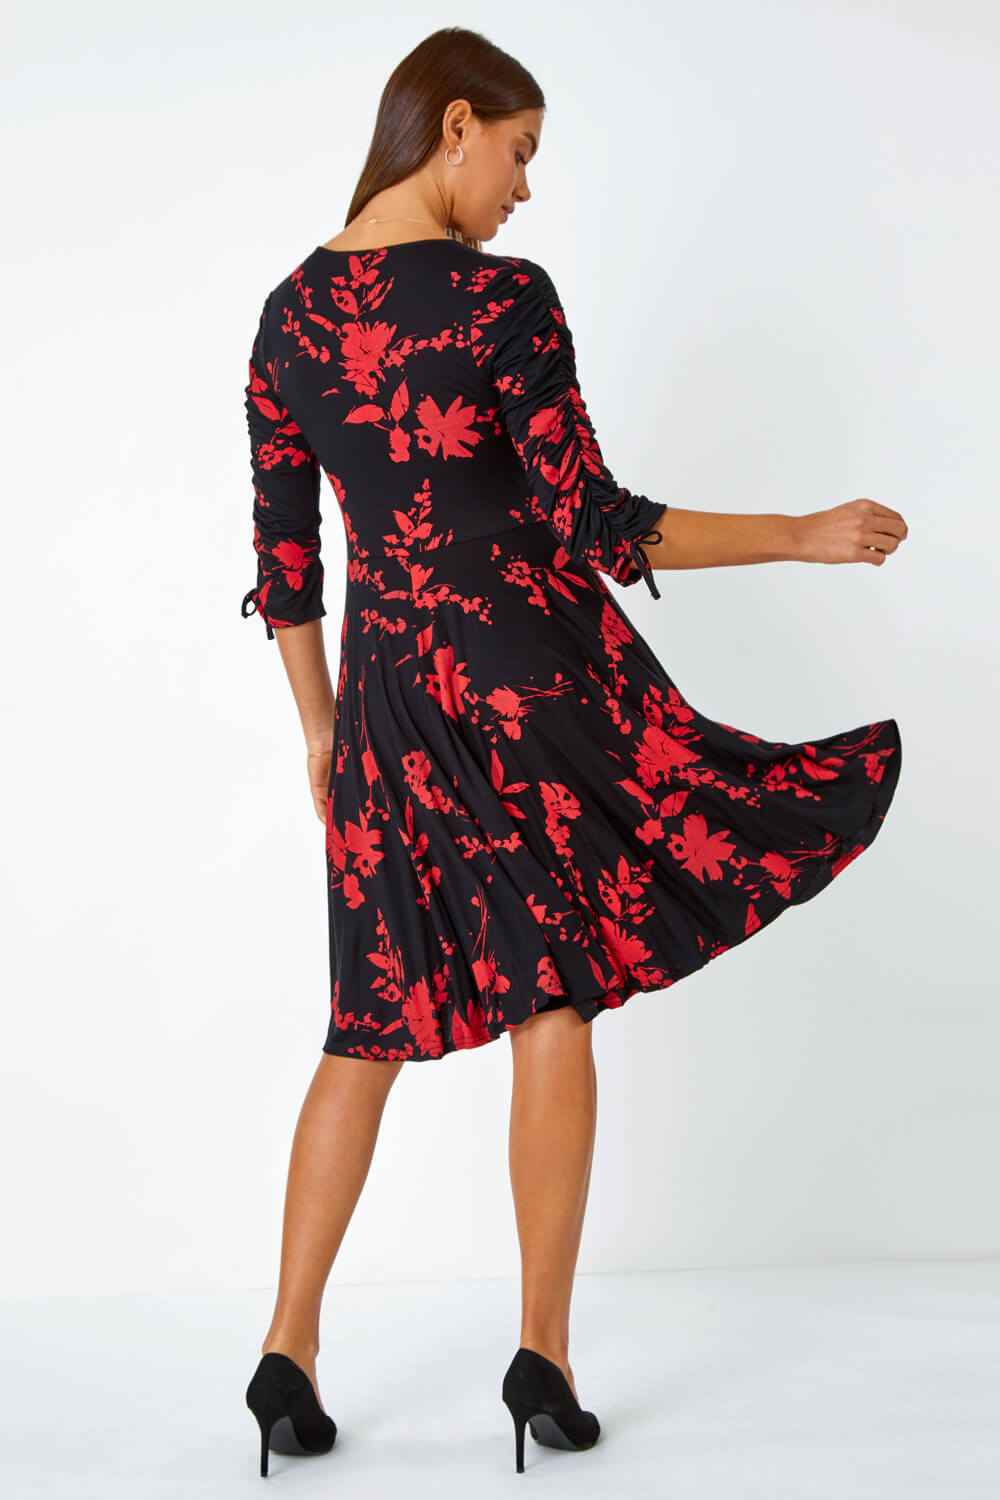 Red Floral Shadow Print Ruched Stretch Dress, Image 3 of 5